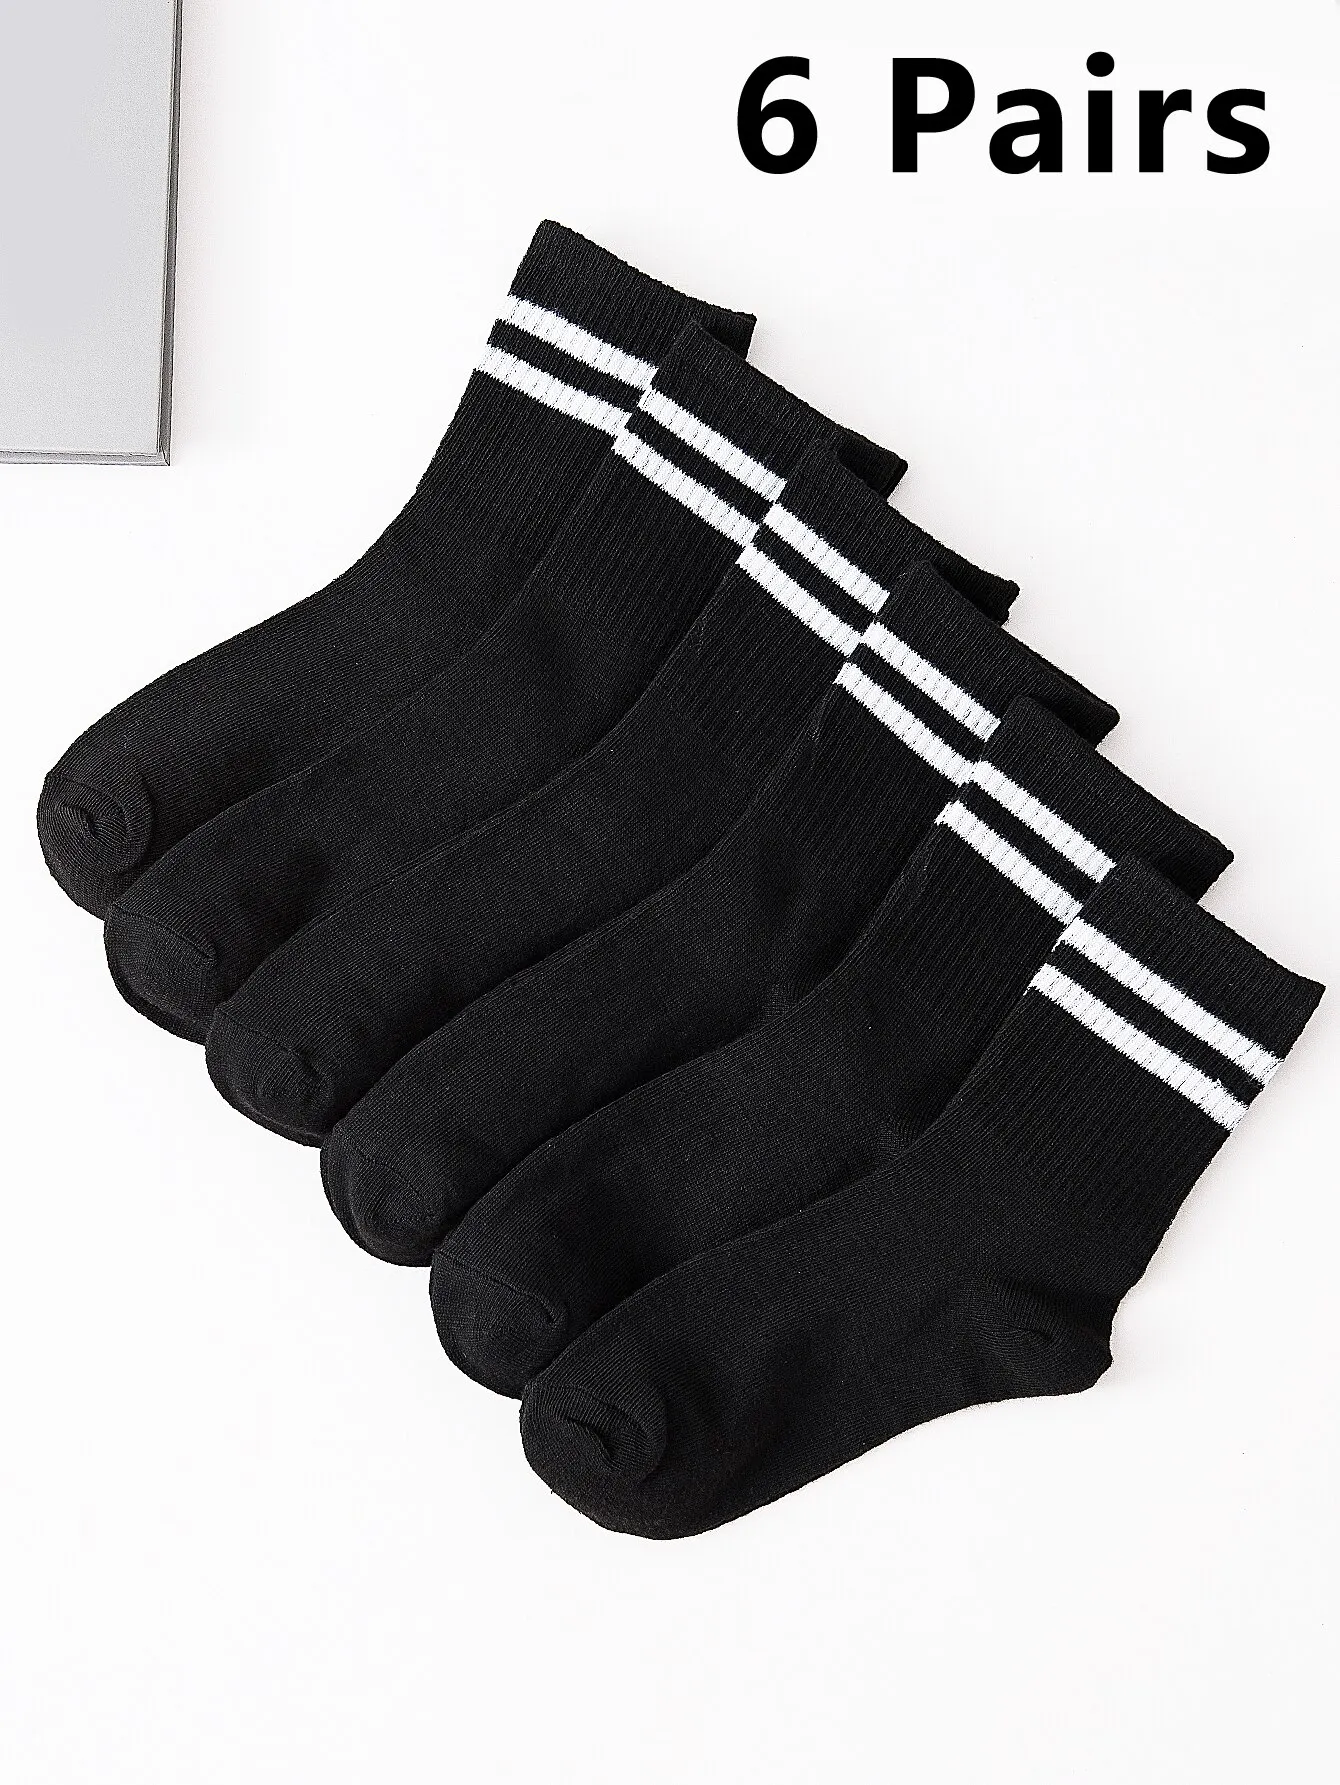 6-Pairs-High-Tube-Mid-Length-Stockings-Set-For-Men-in-Solid-Black-And ...